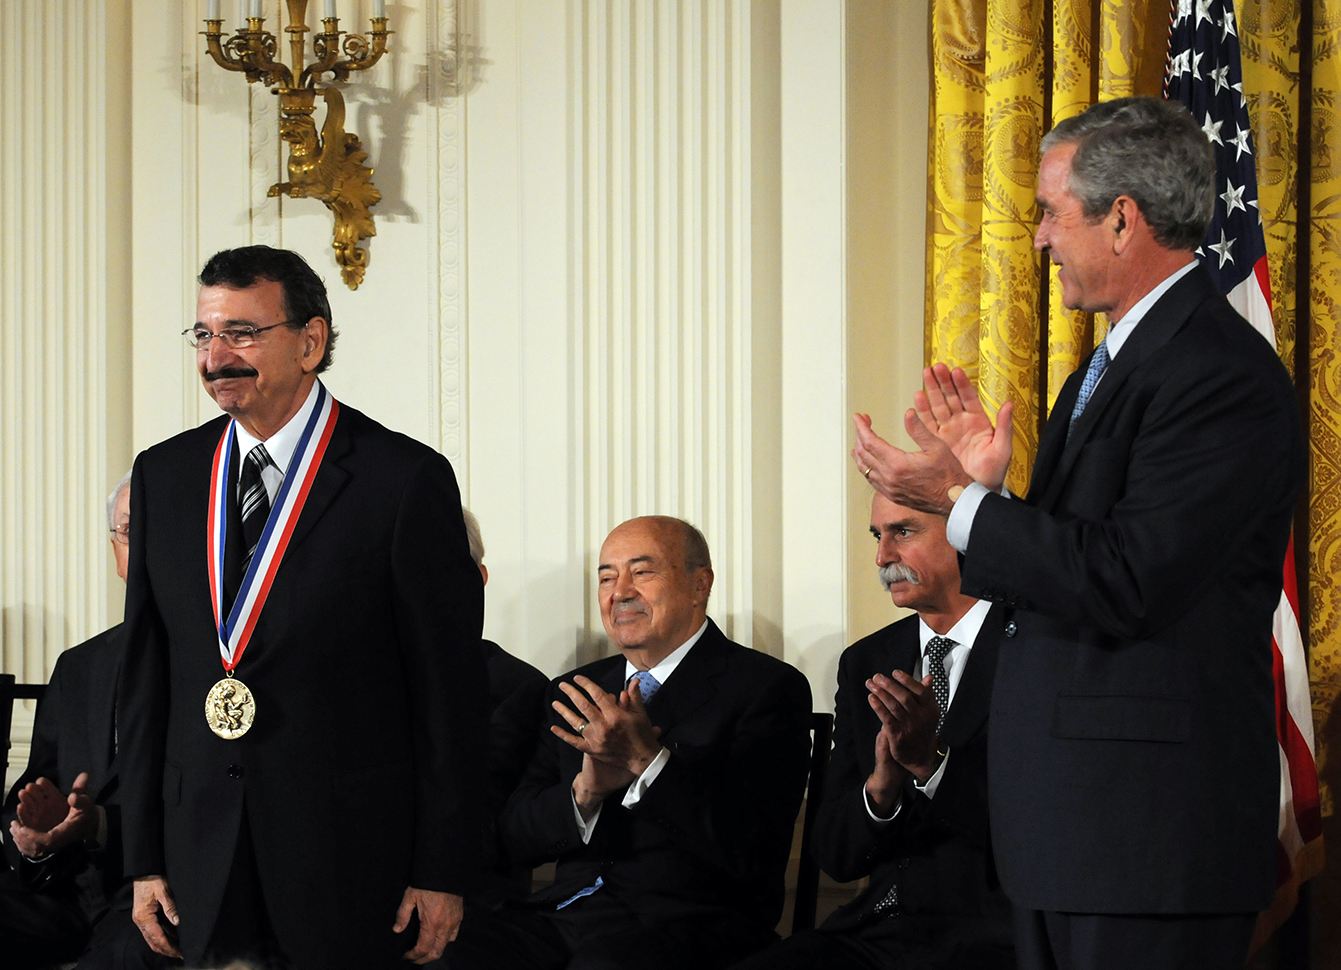 President George W. Bush awards the 2007 National Medal of Science to Dr. Mostafa El-Sayed during an East Room ceremony at The White House in Washington, DC on Monday, September 29, 2008.